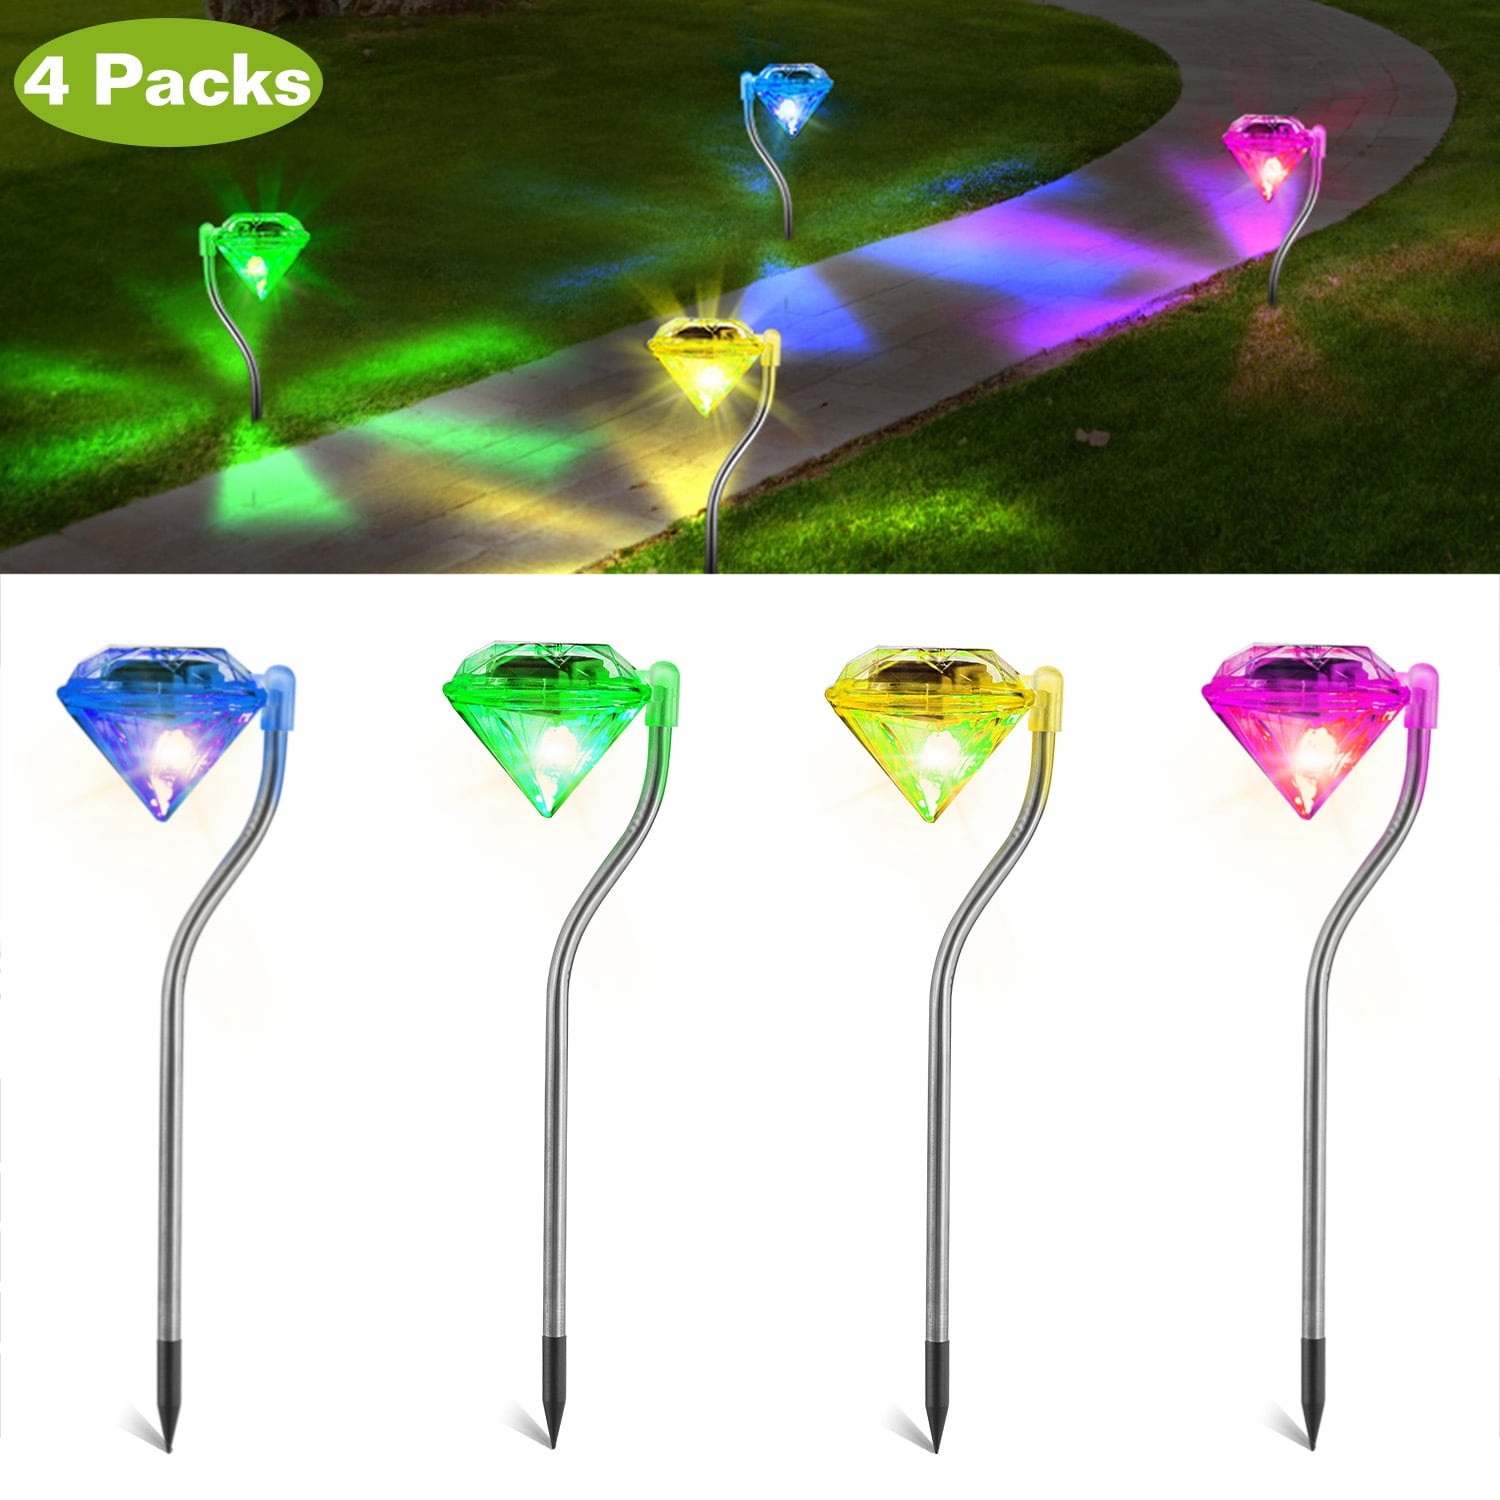 4x 7 Color-Changing Diamond Solar Lights Waterproof For Landscape/Pathway/Garden 